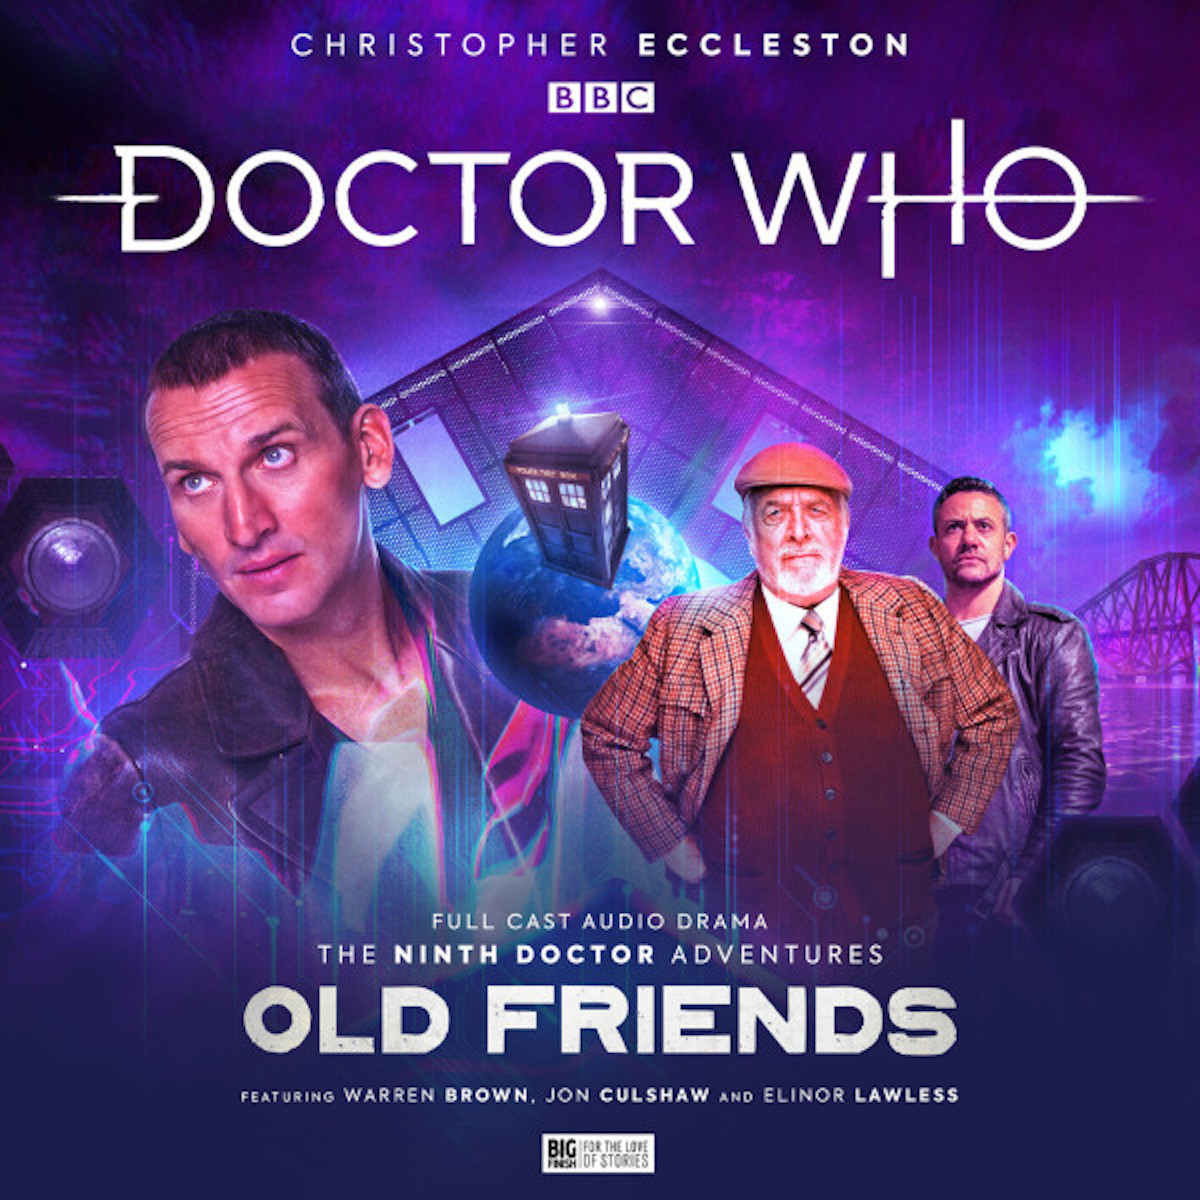 The Ninth Doctor Adventures Old Friends